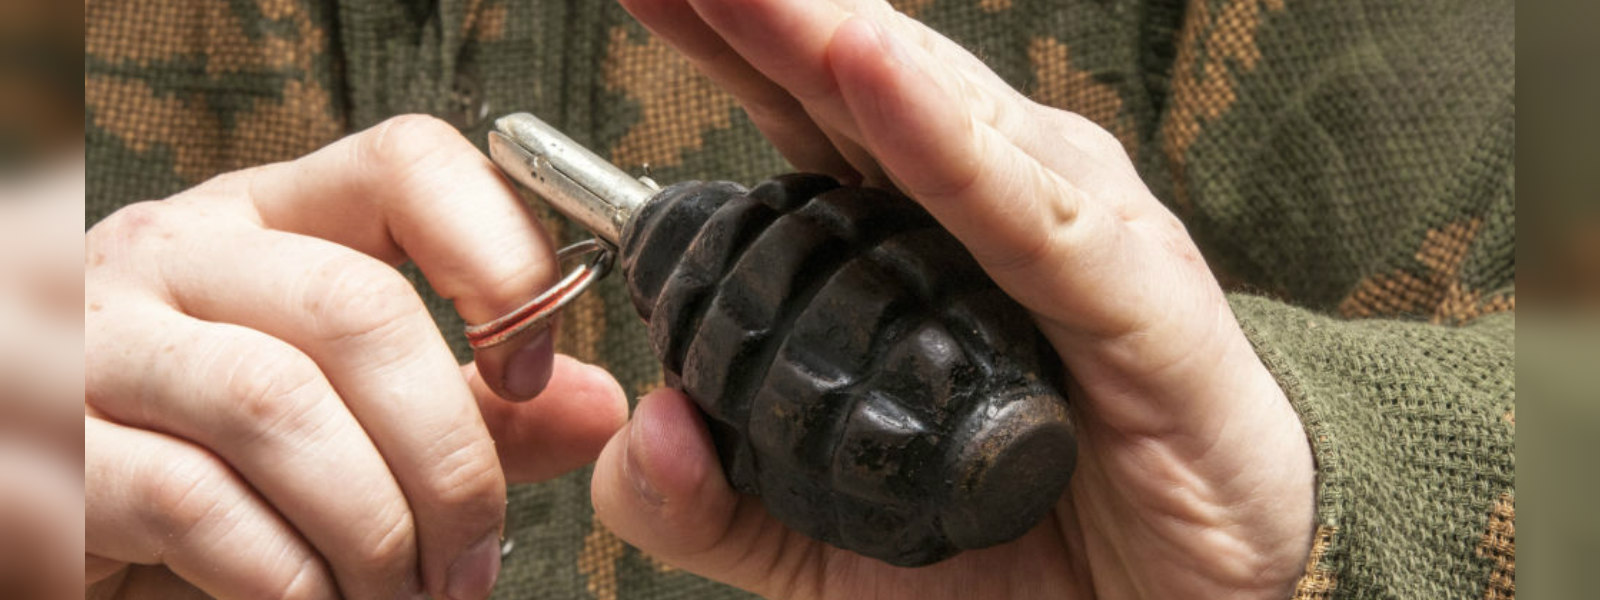 Two arrested for possession of a hand grenade